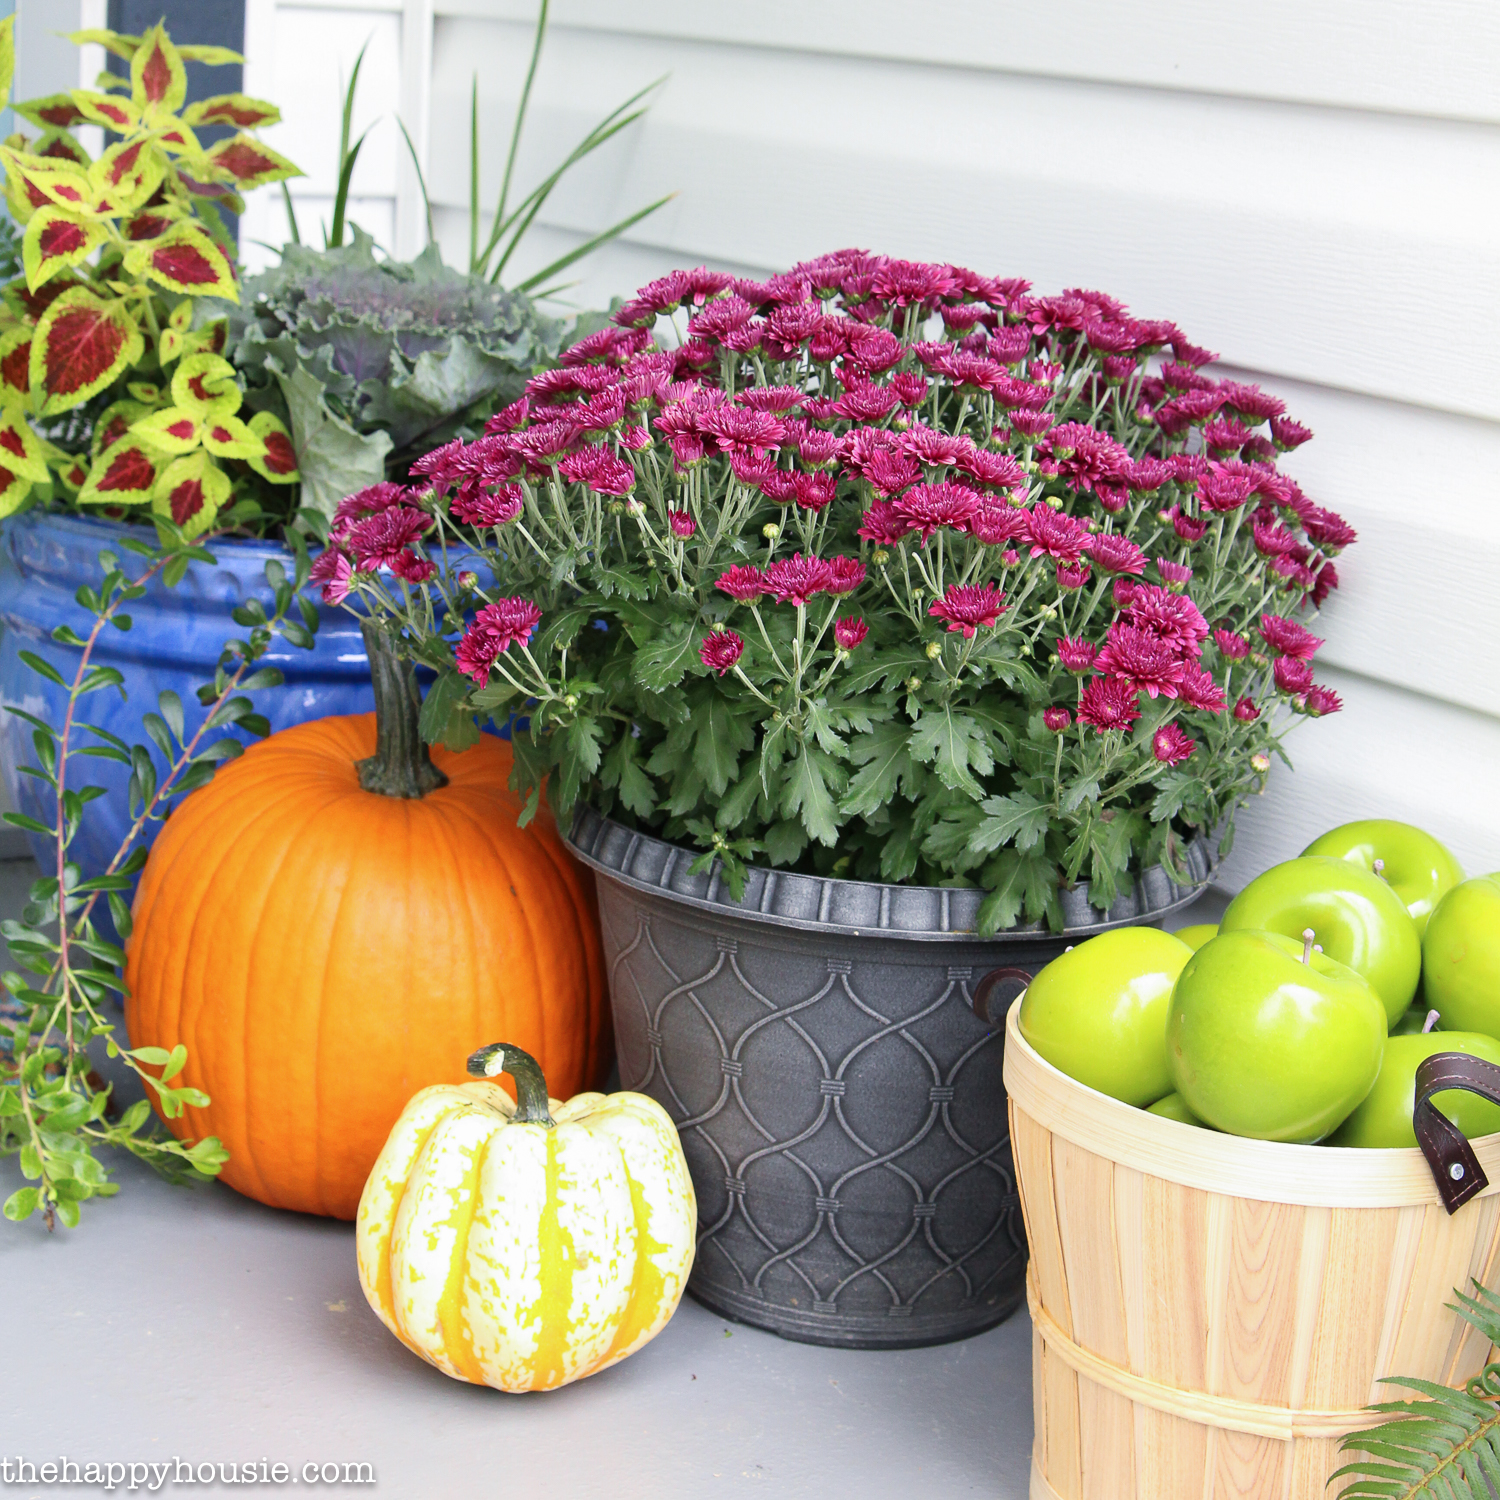 Vibrant purple flowers are in a pot beside a basket of apples.